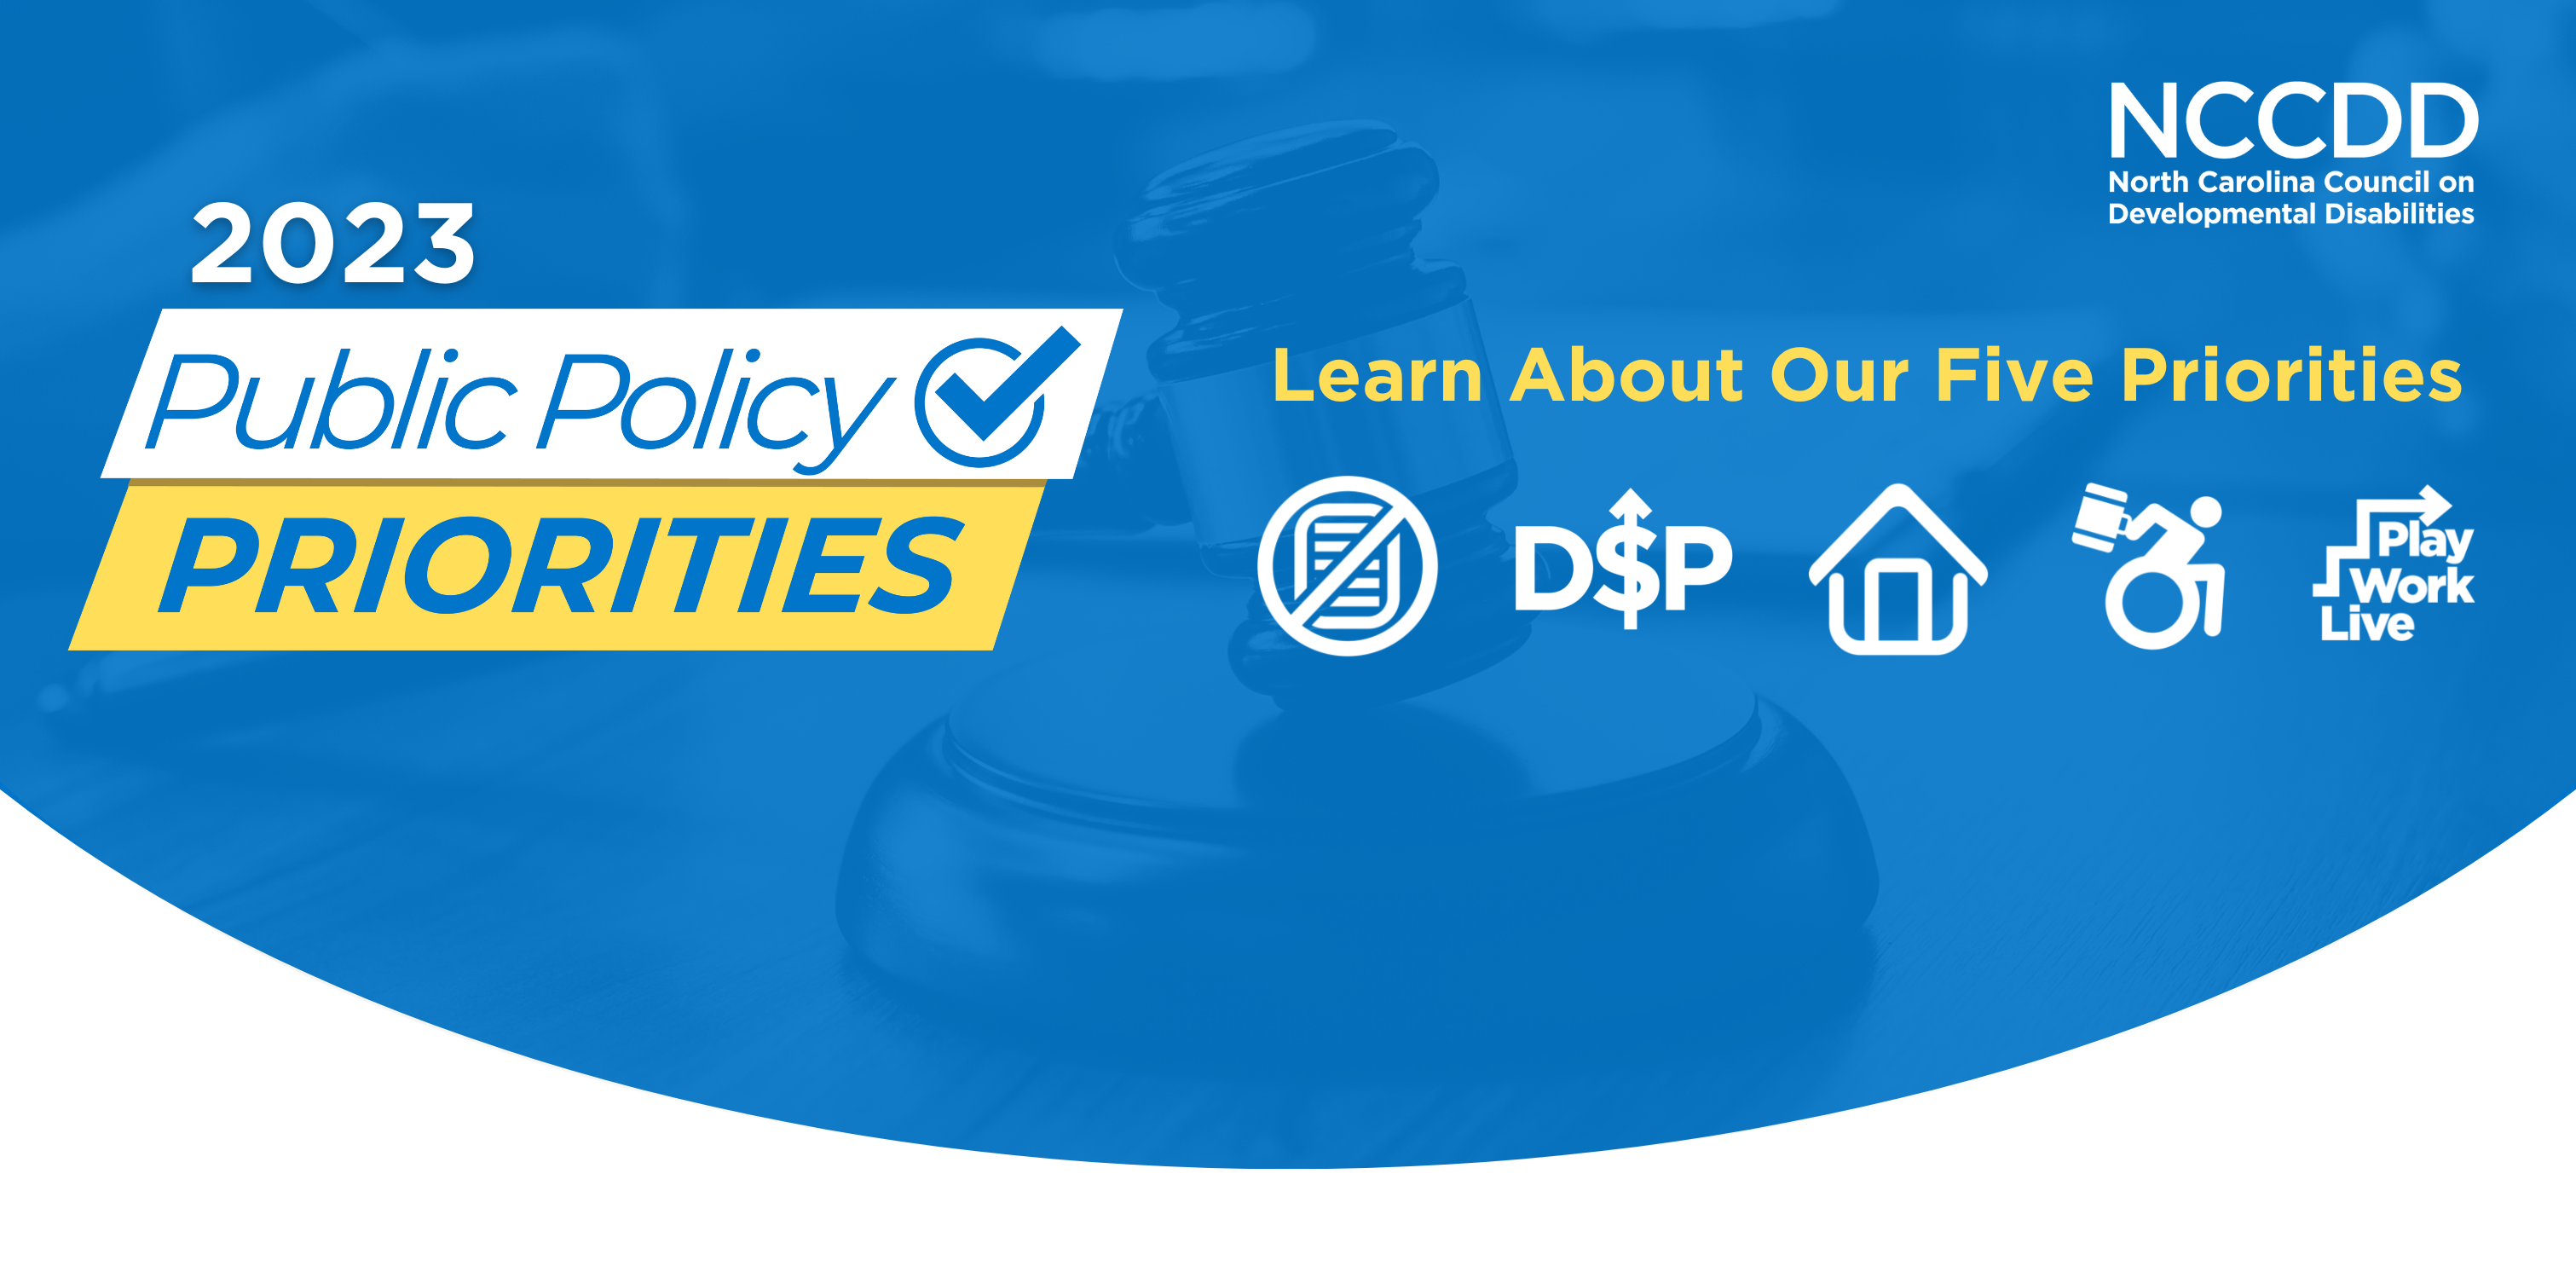 Learn About Our Five Public Policy Priorities!